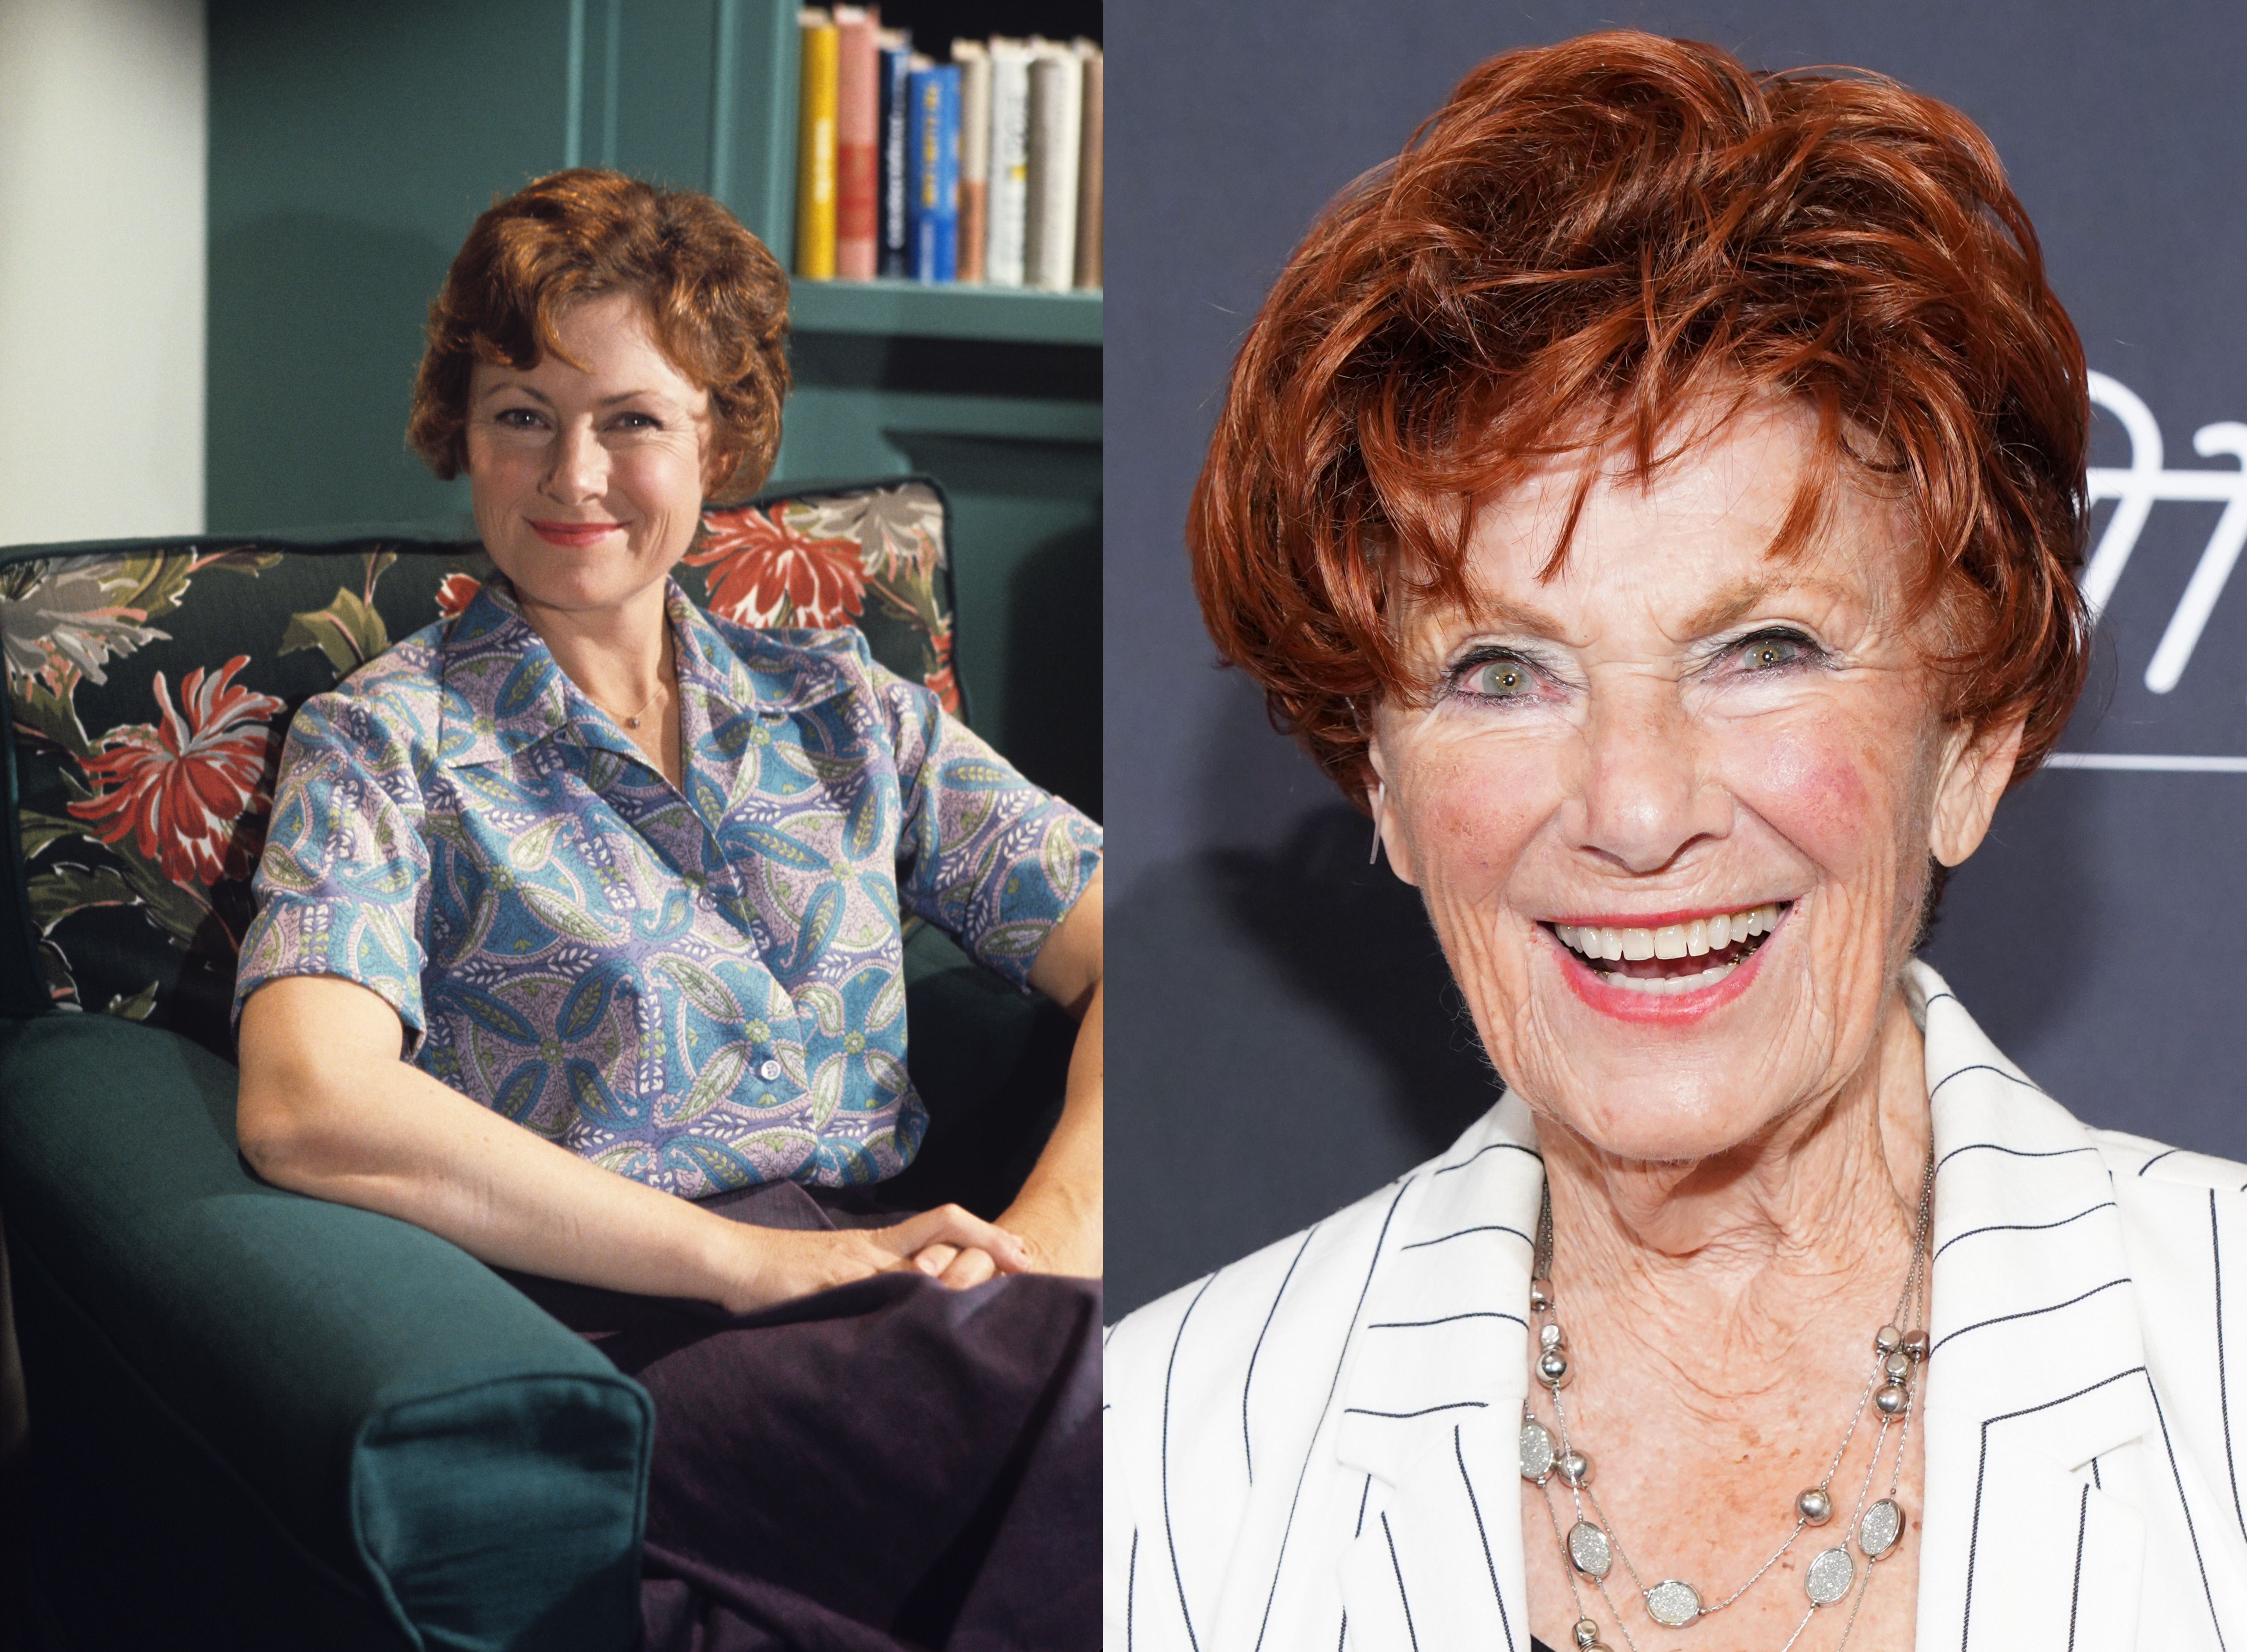 Marion Ross as Marion Cunningham on season one of "Happy Days." | Marion Ross attends Garry Marshall Theatre's 3rd Annual Founder's Gala Honoring Original "Happy Days" Cast at The Jonathan Club on November 13, 2019 in Los Angeles, California. | Source: Getty Images